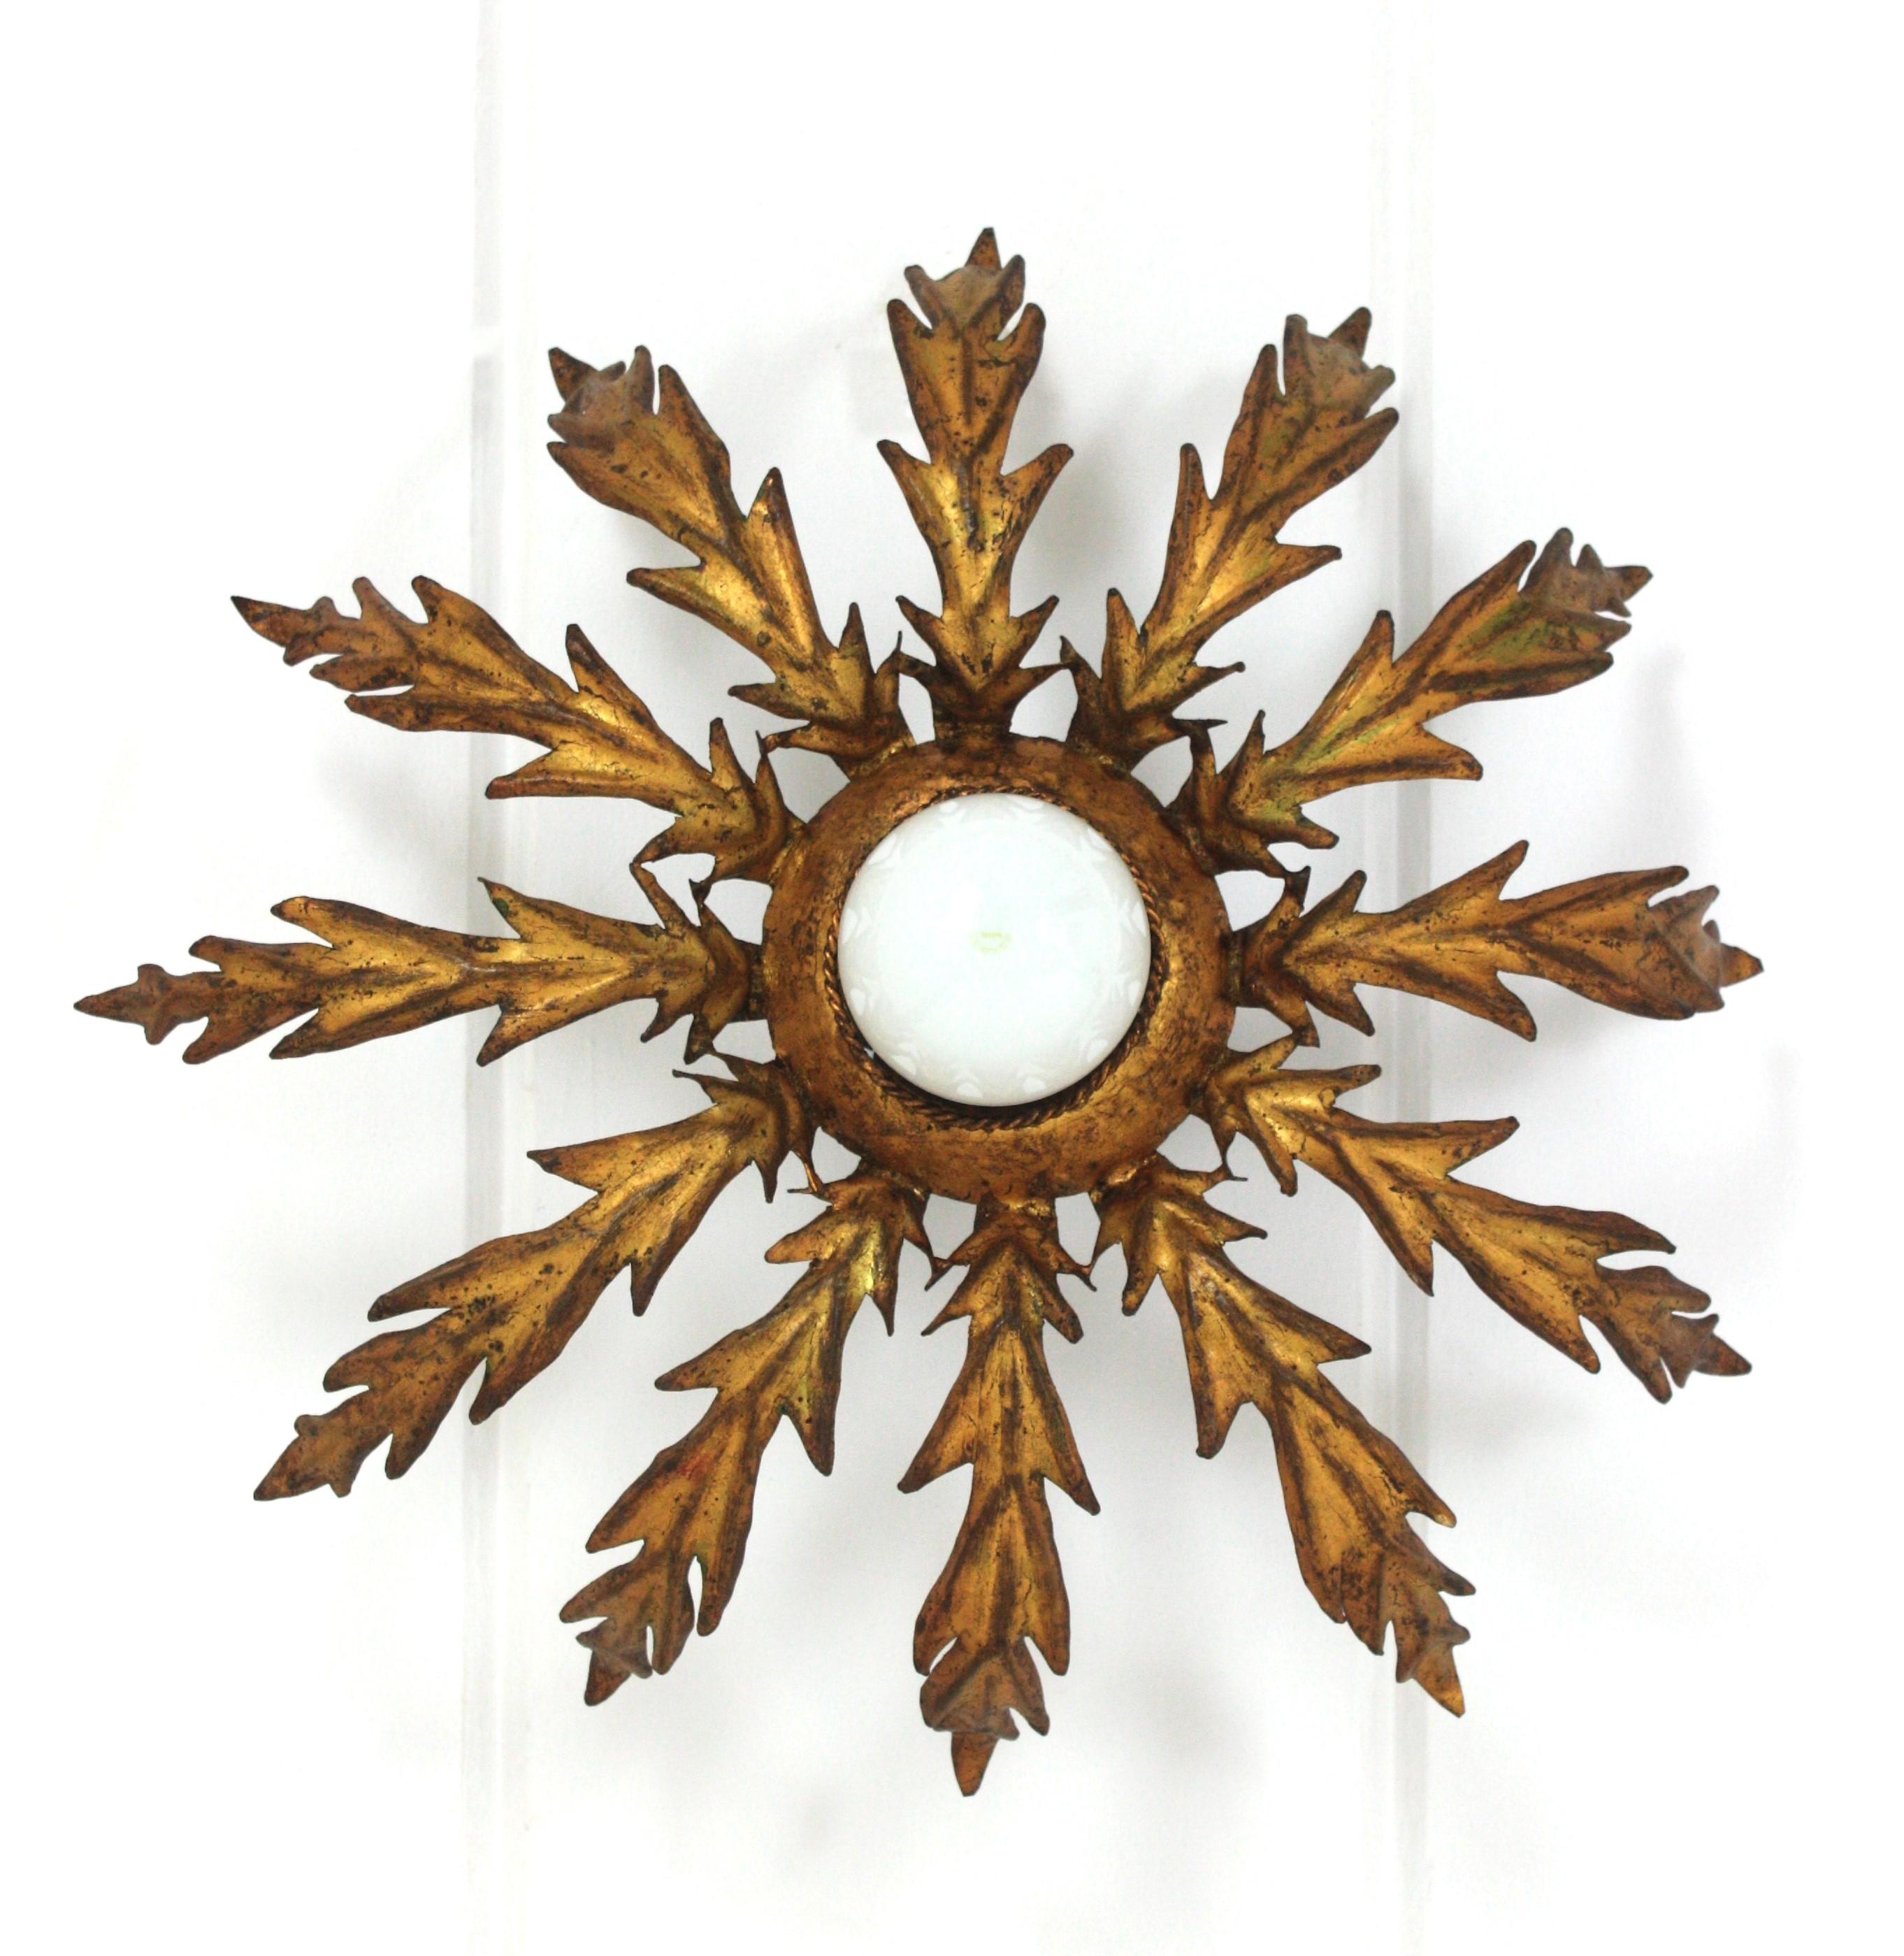 French Sunburst Leafed Ceiling Light Fixture in Gilt Iron, 1940s For Sale 4